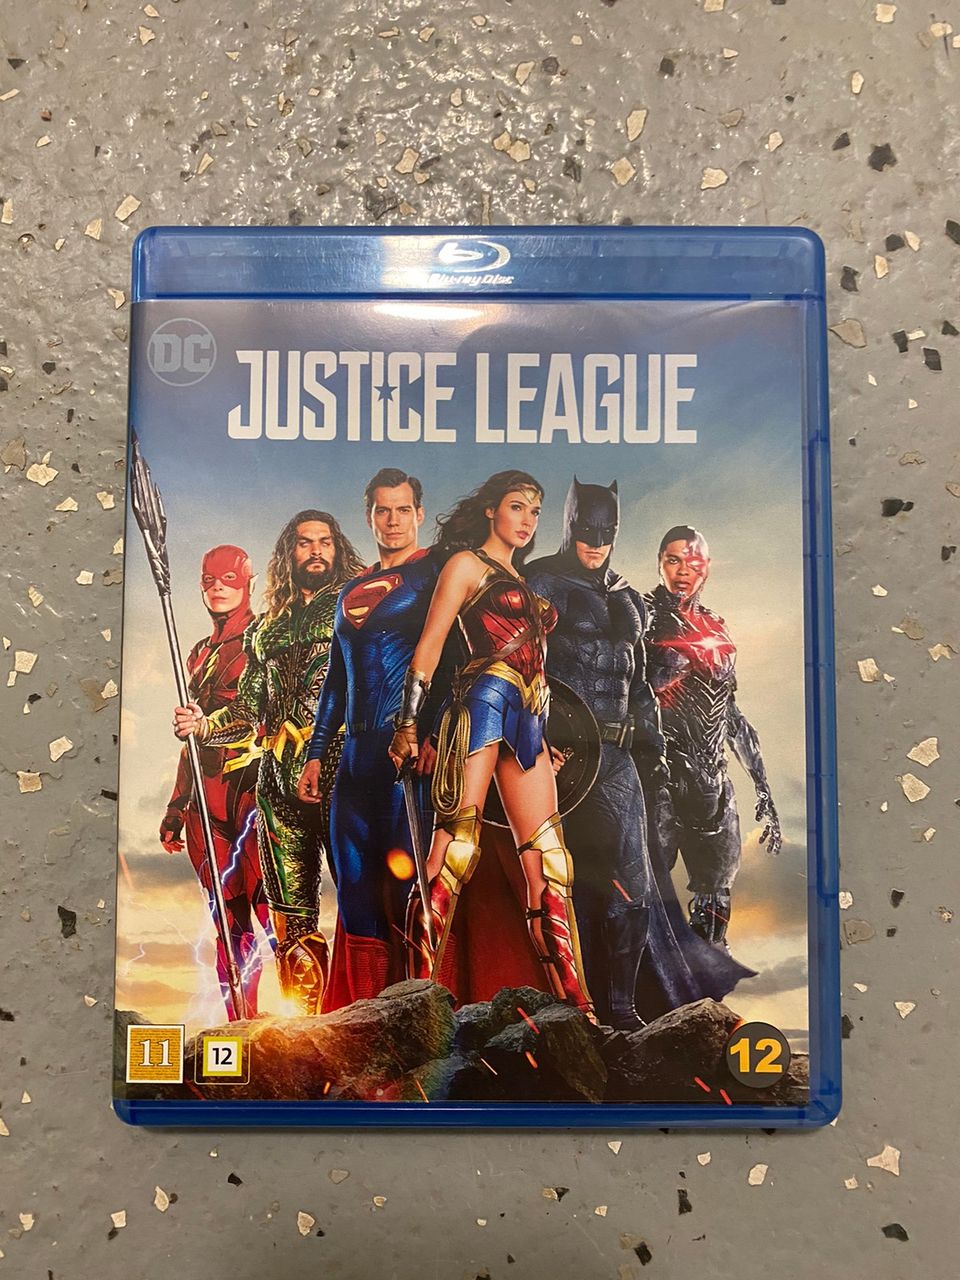 Justice league blu ray